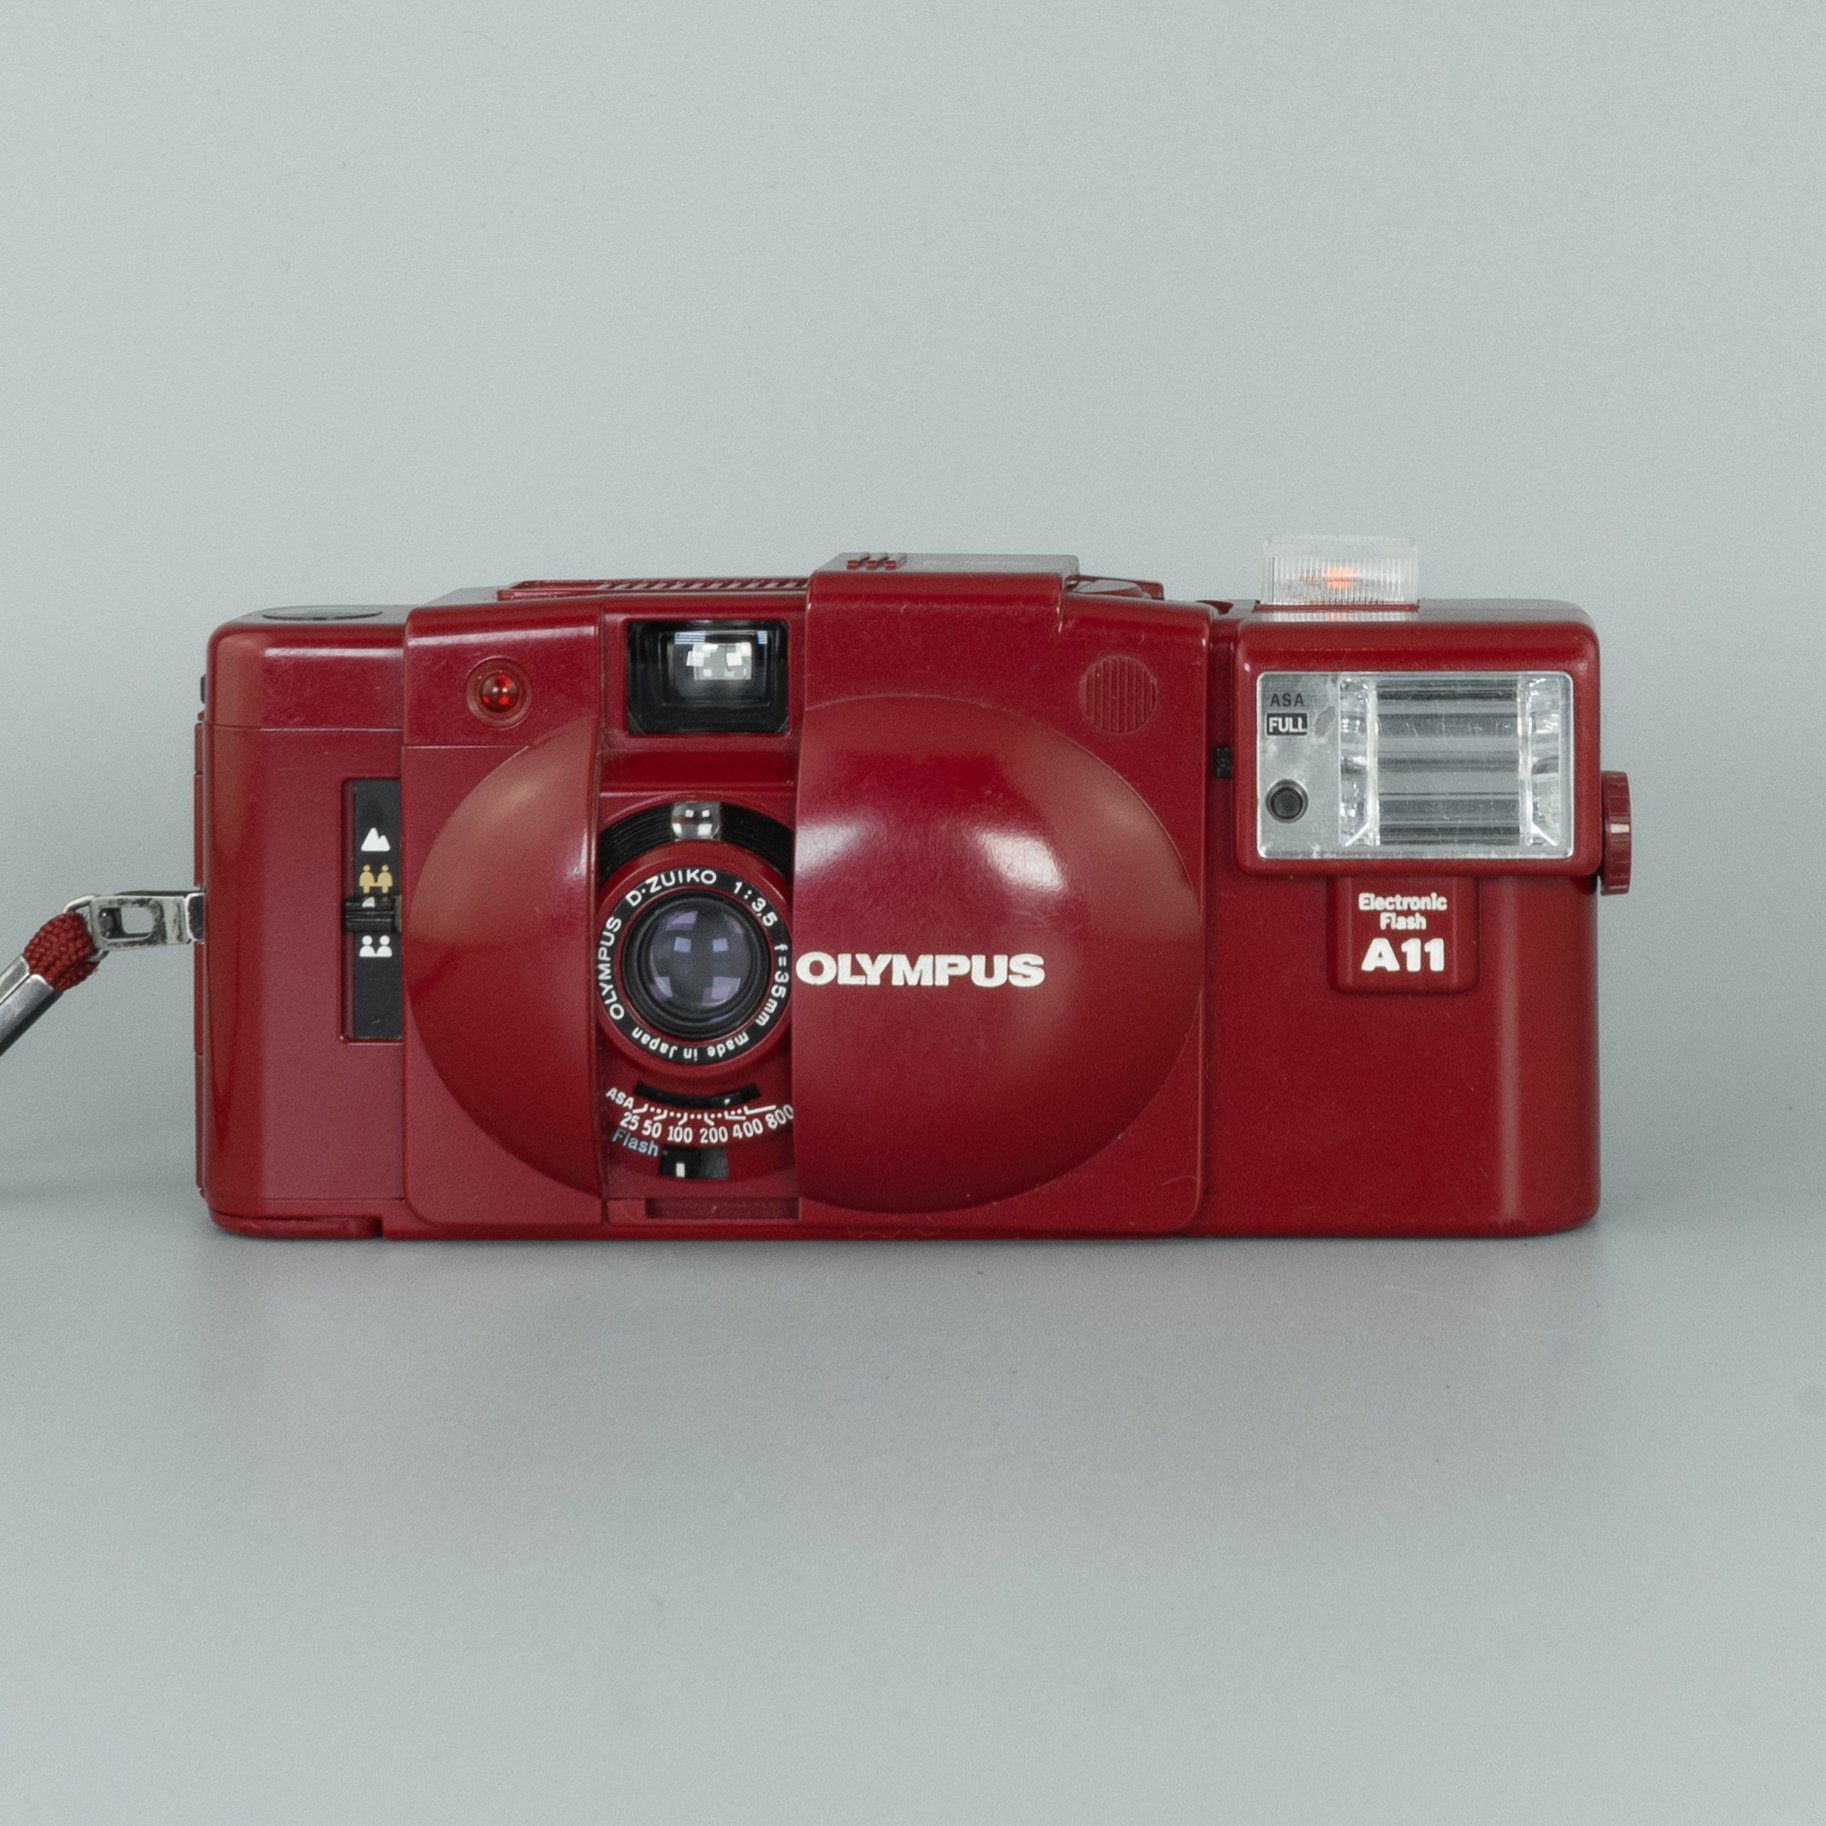 Olympus XA2 (Limited 'Heart Red' Edition) with A11 Flash